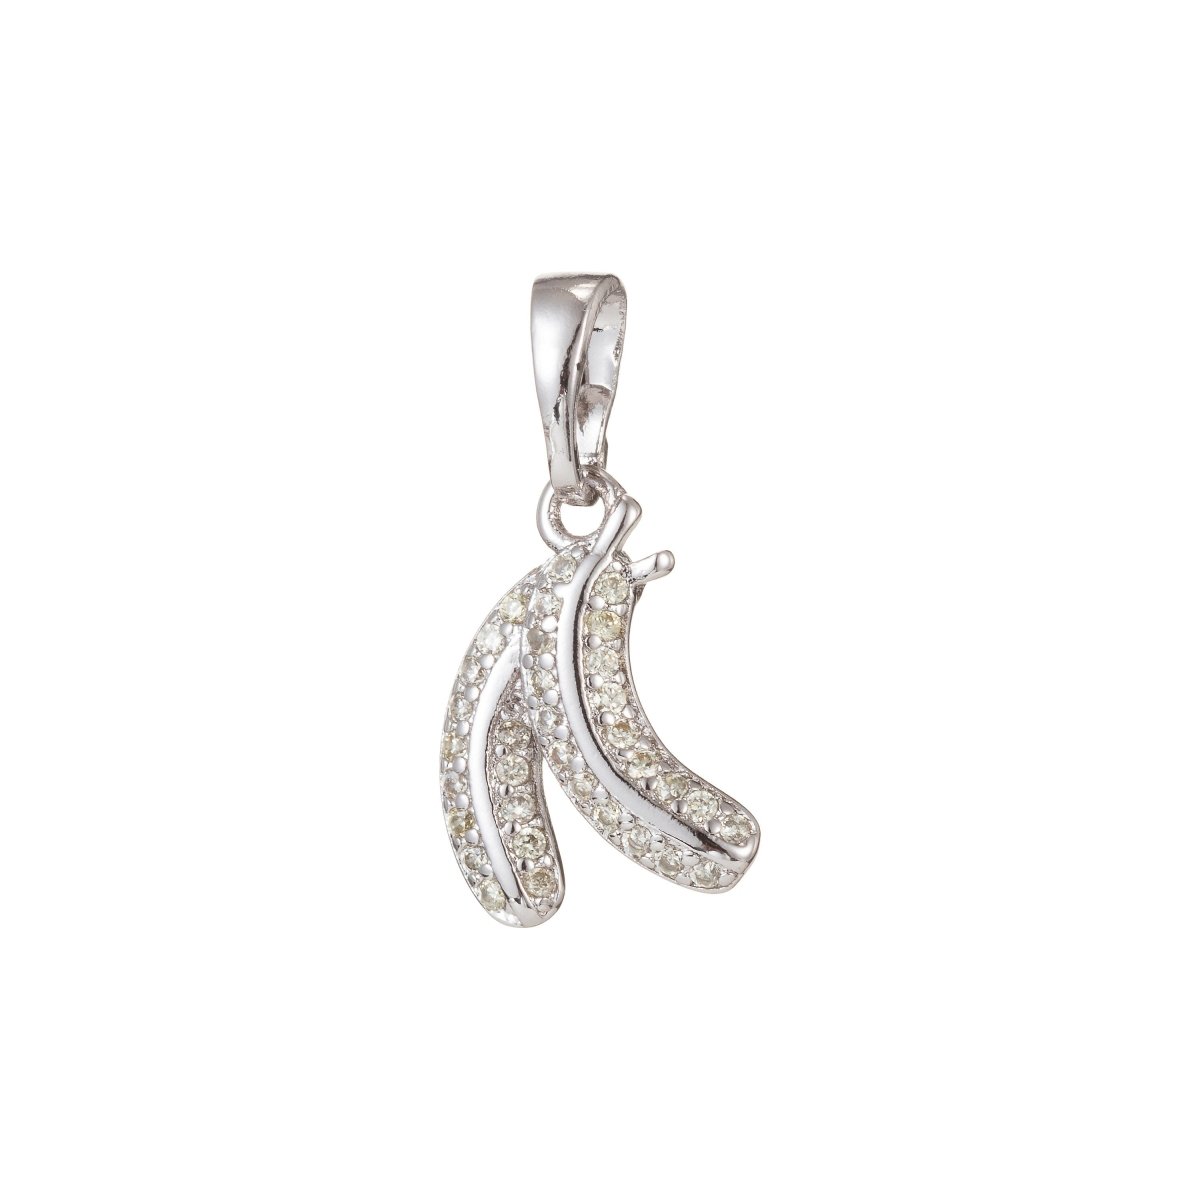 18k Gold Filled Micro Pave CZ Banana Pendant Charm, Micro Pave CZ Banana Pendant Charm, White Gold Filled Fruit Pendant, For DIY Jewelry I-426 I-489 - DLUXCA